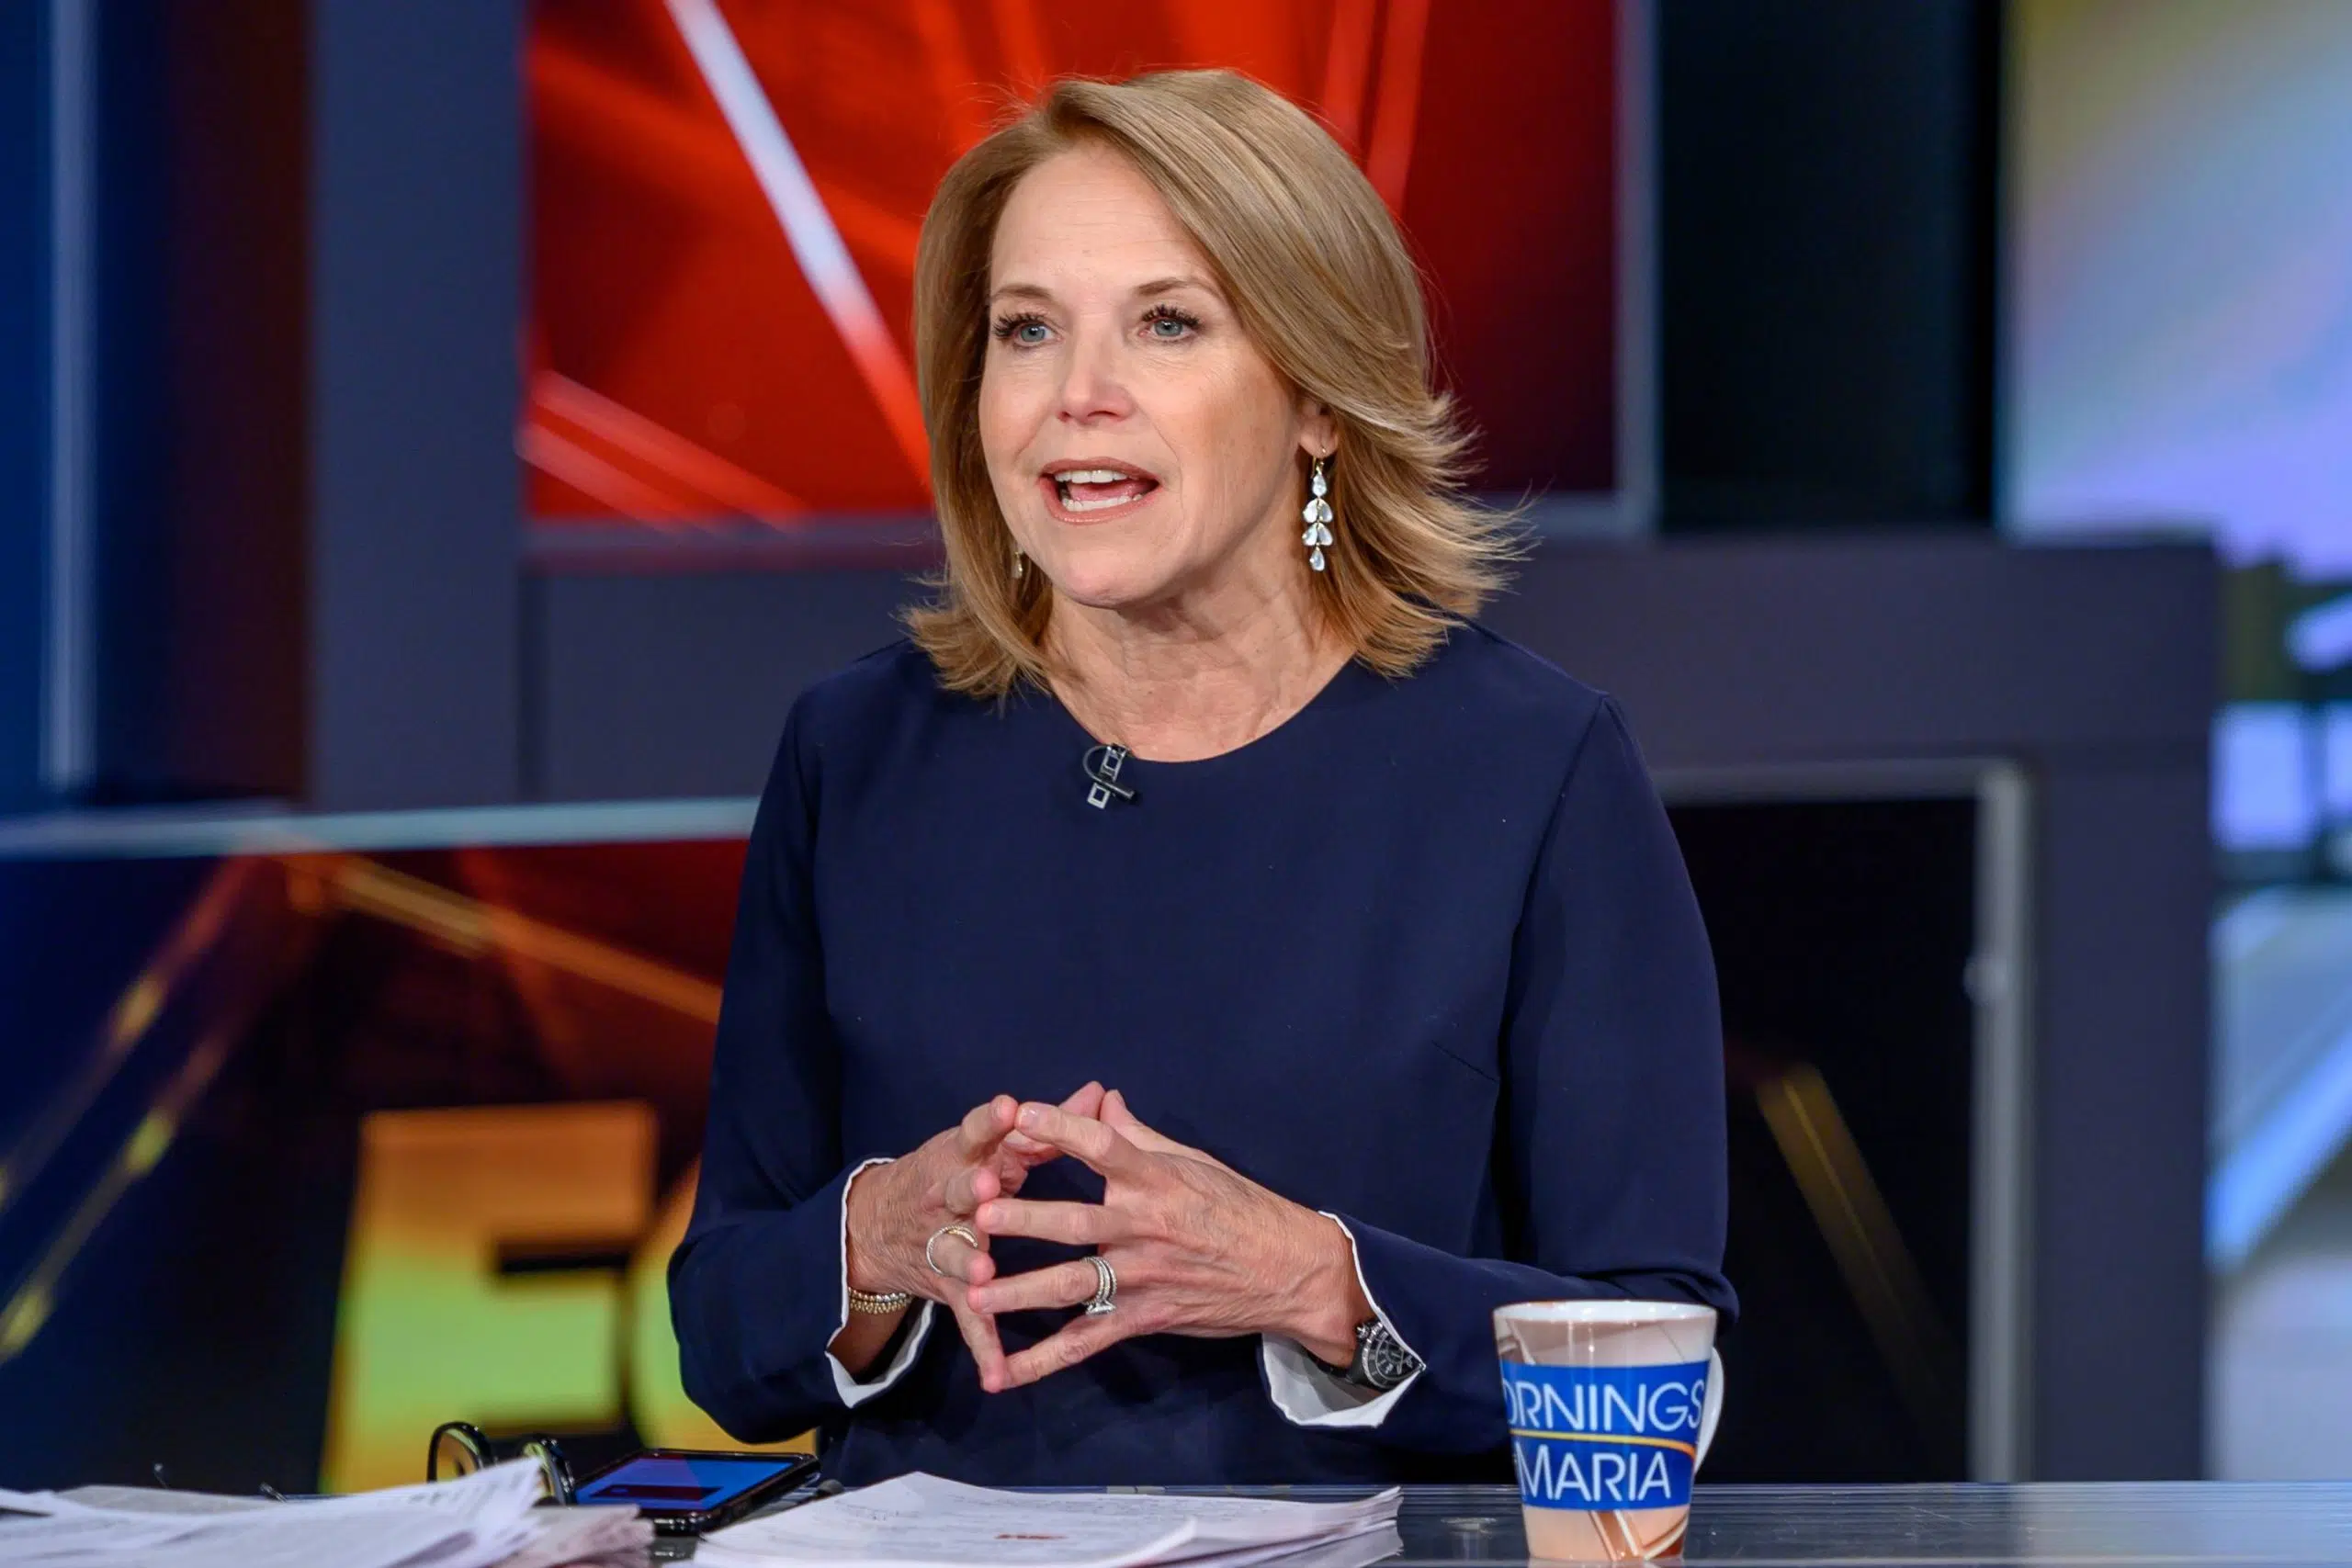 JEOPARDY! Has Found Its Next Guest Host In Katie Couric